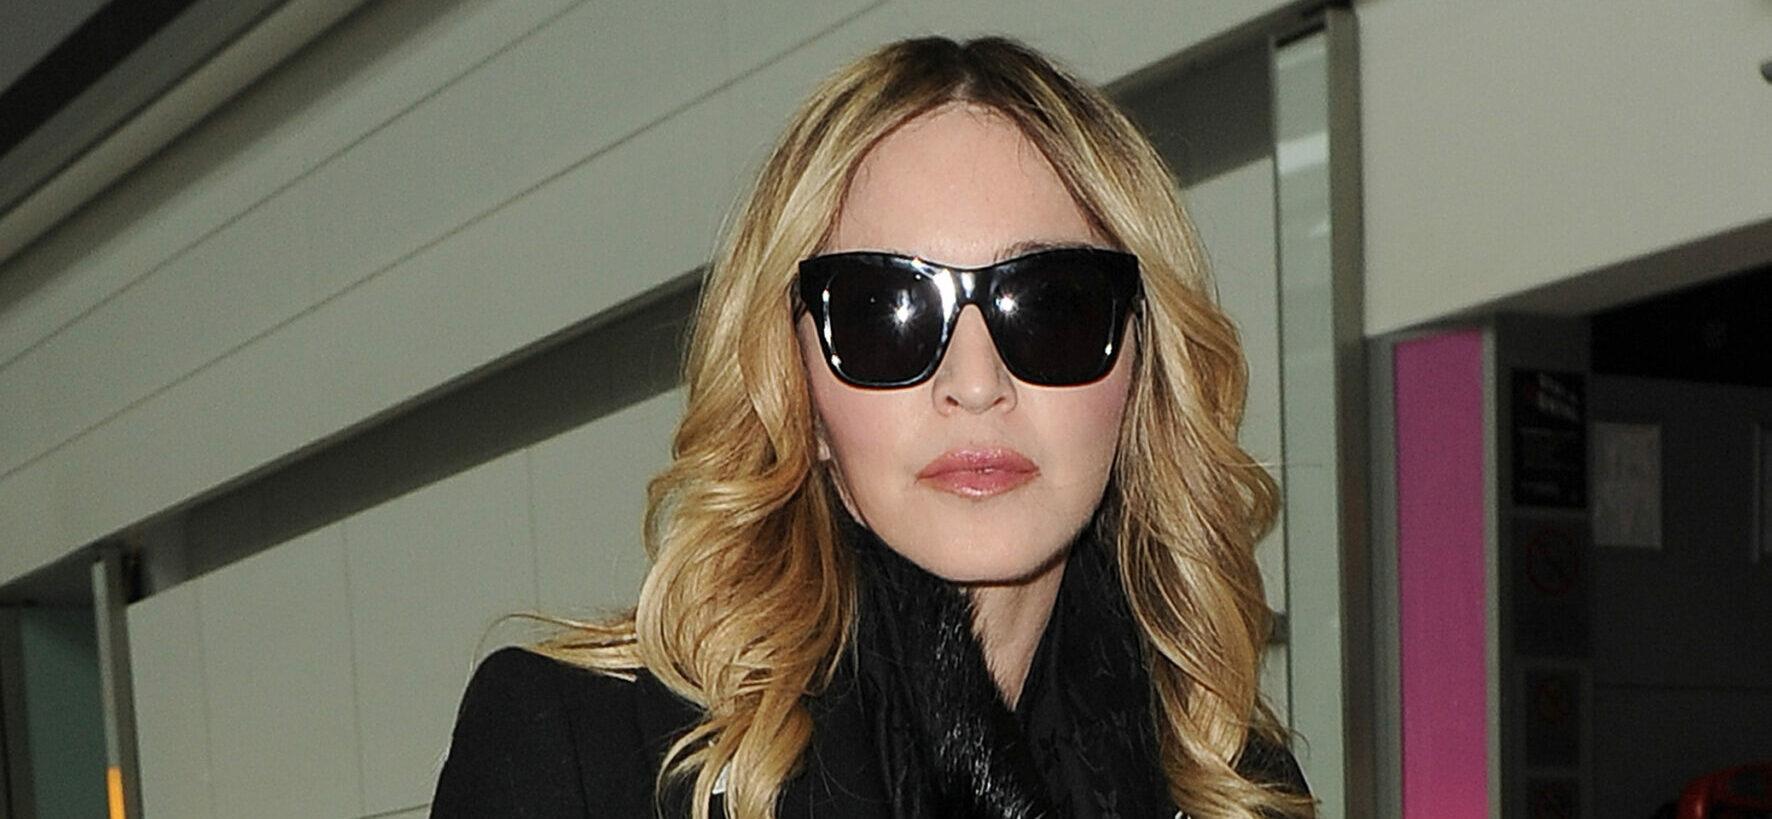 Madonna Credits Her Dad For Teaching Her How To Be A ‘Survivor’ In Father’s Day Post